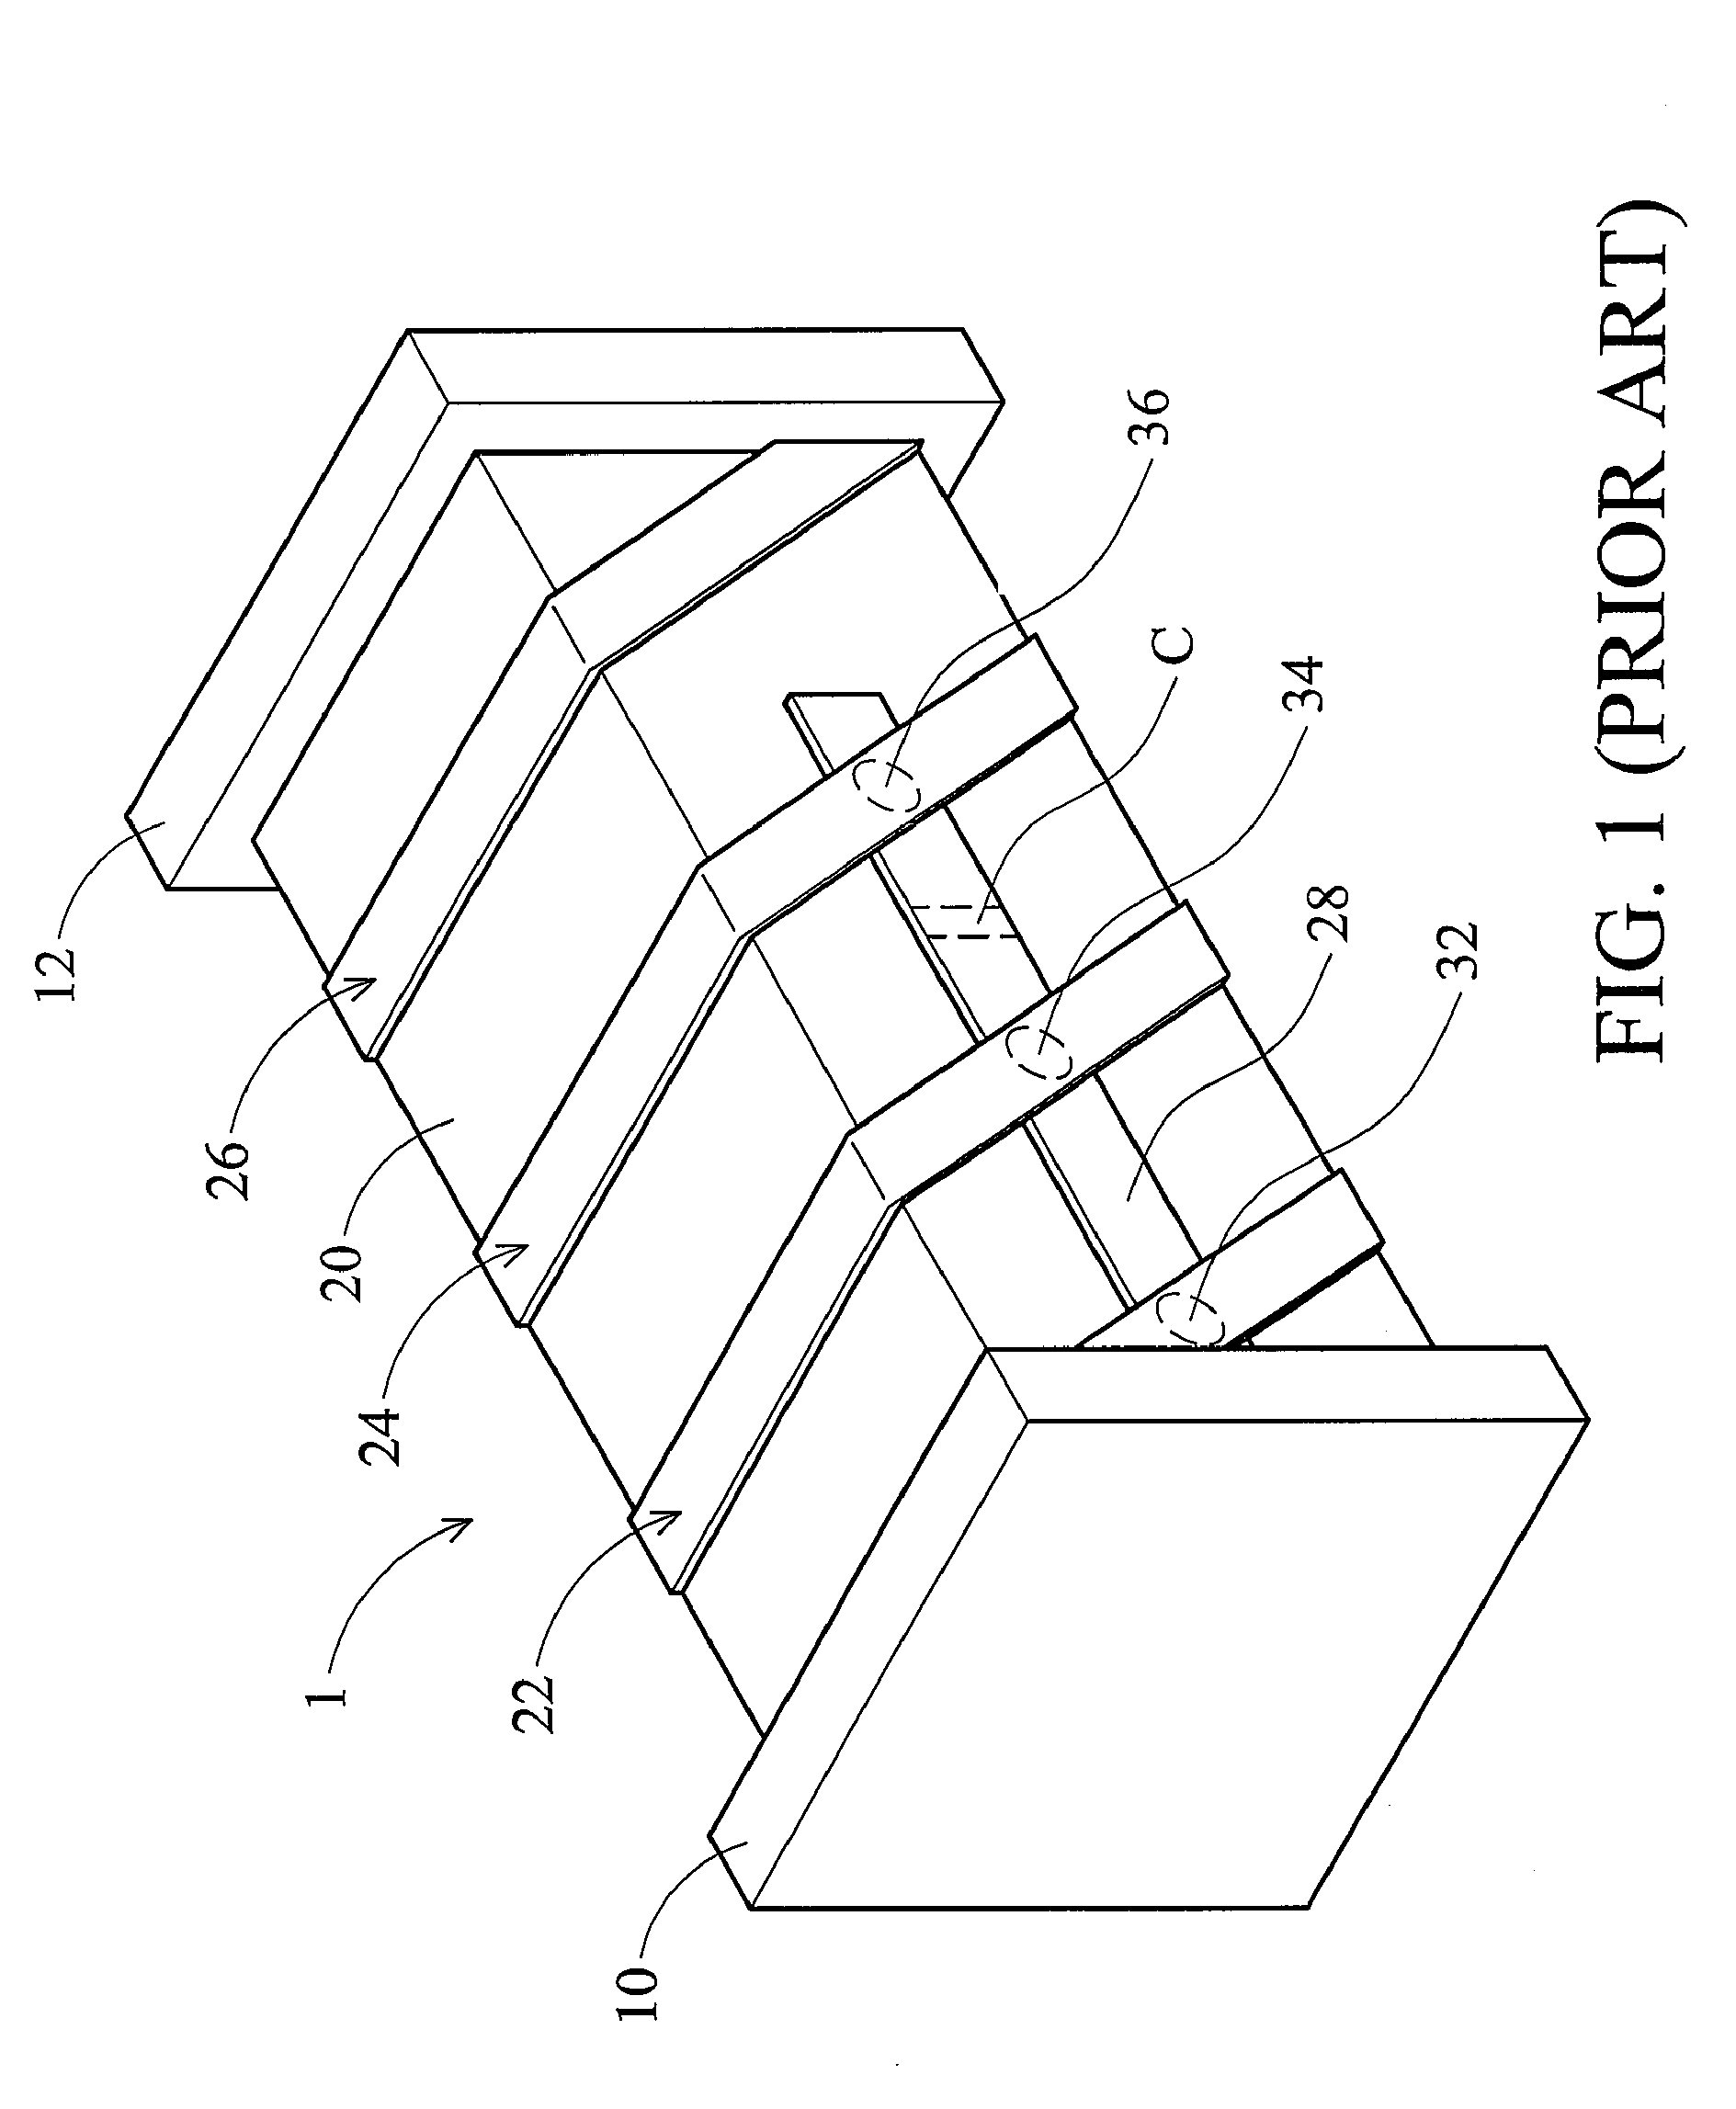 Tunable embedded inductor devices